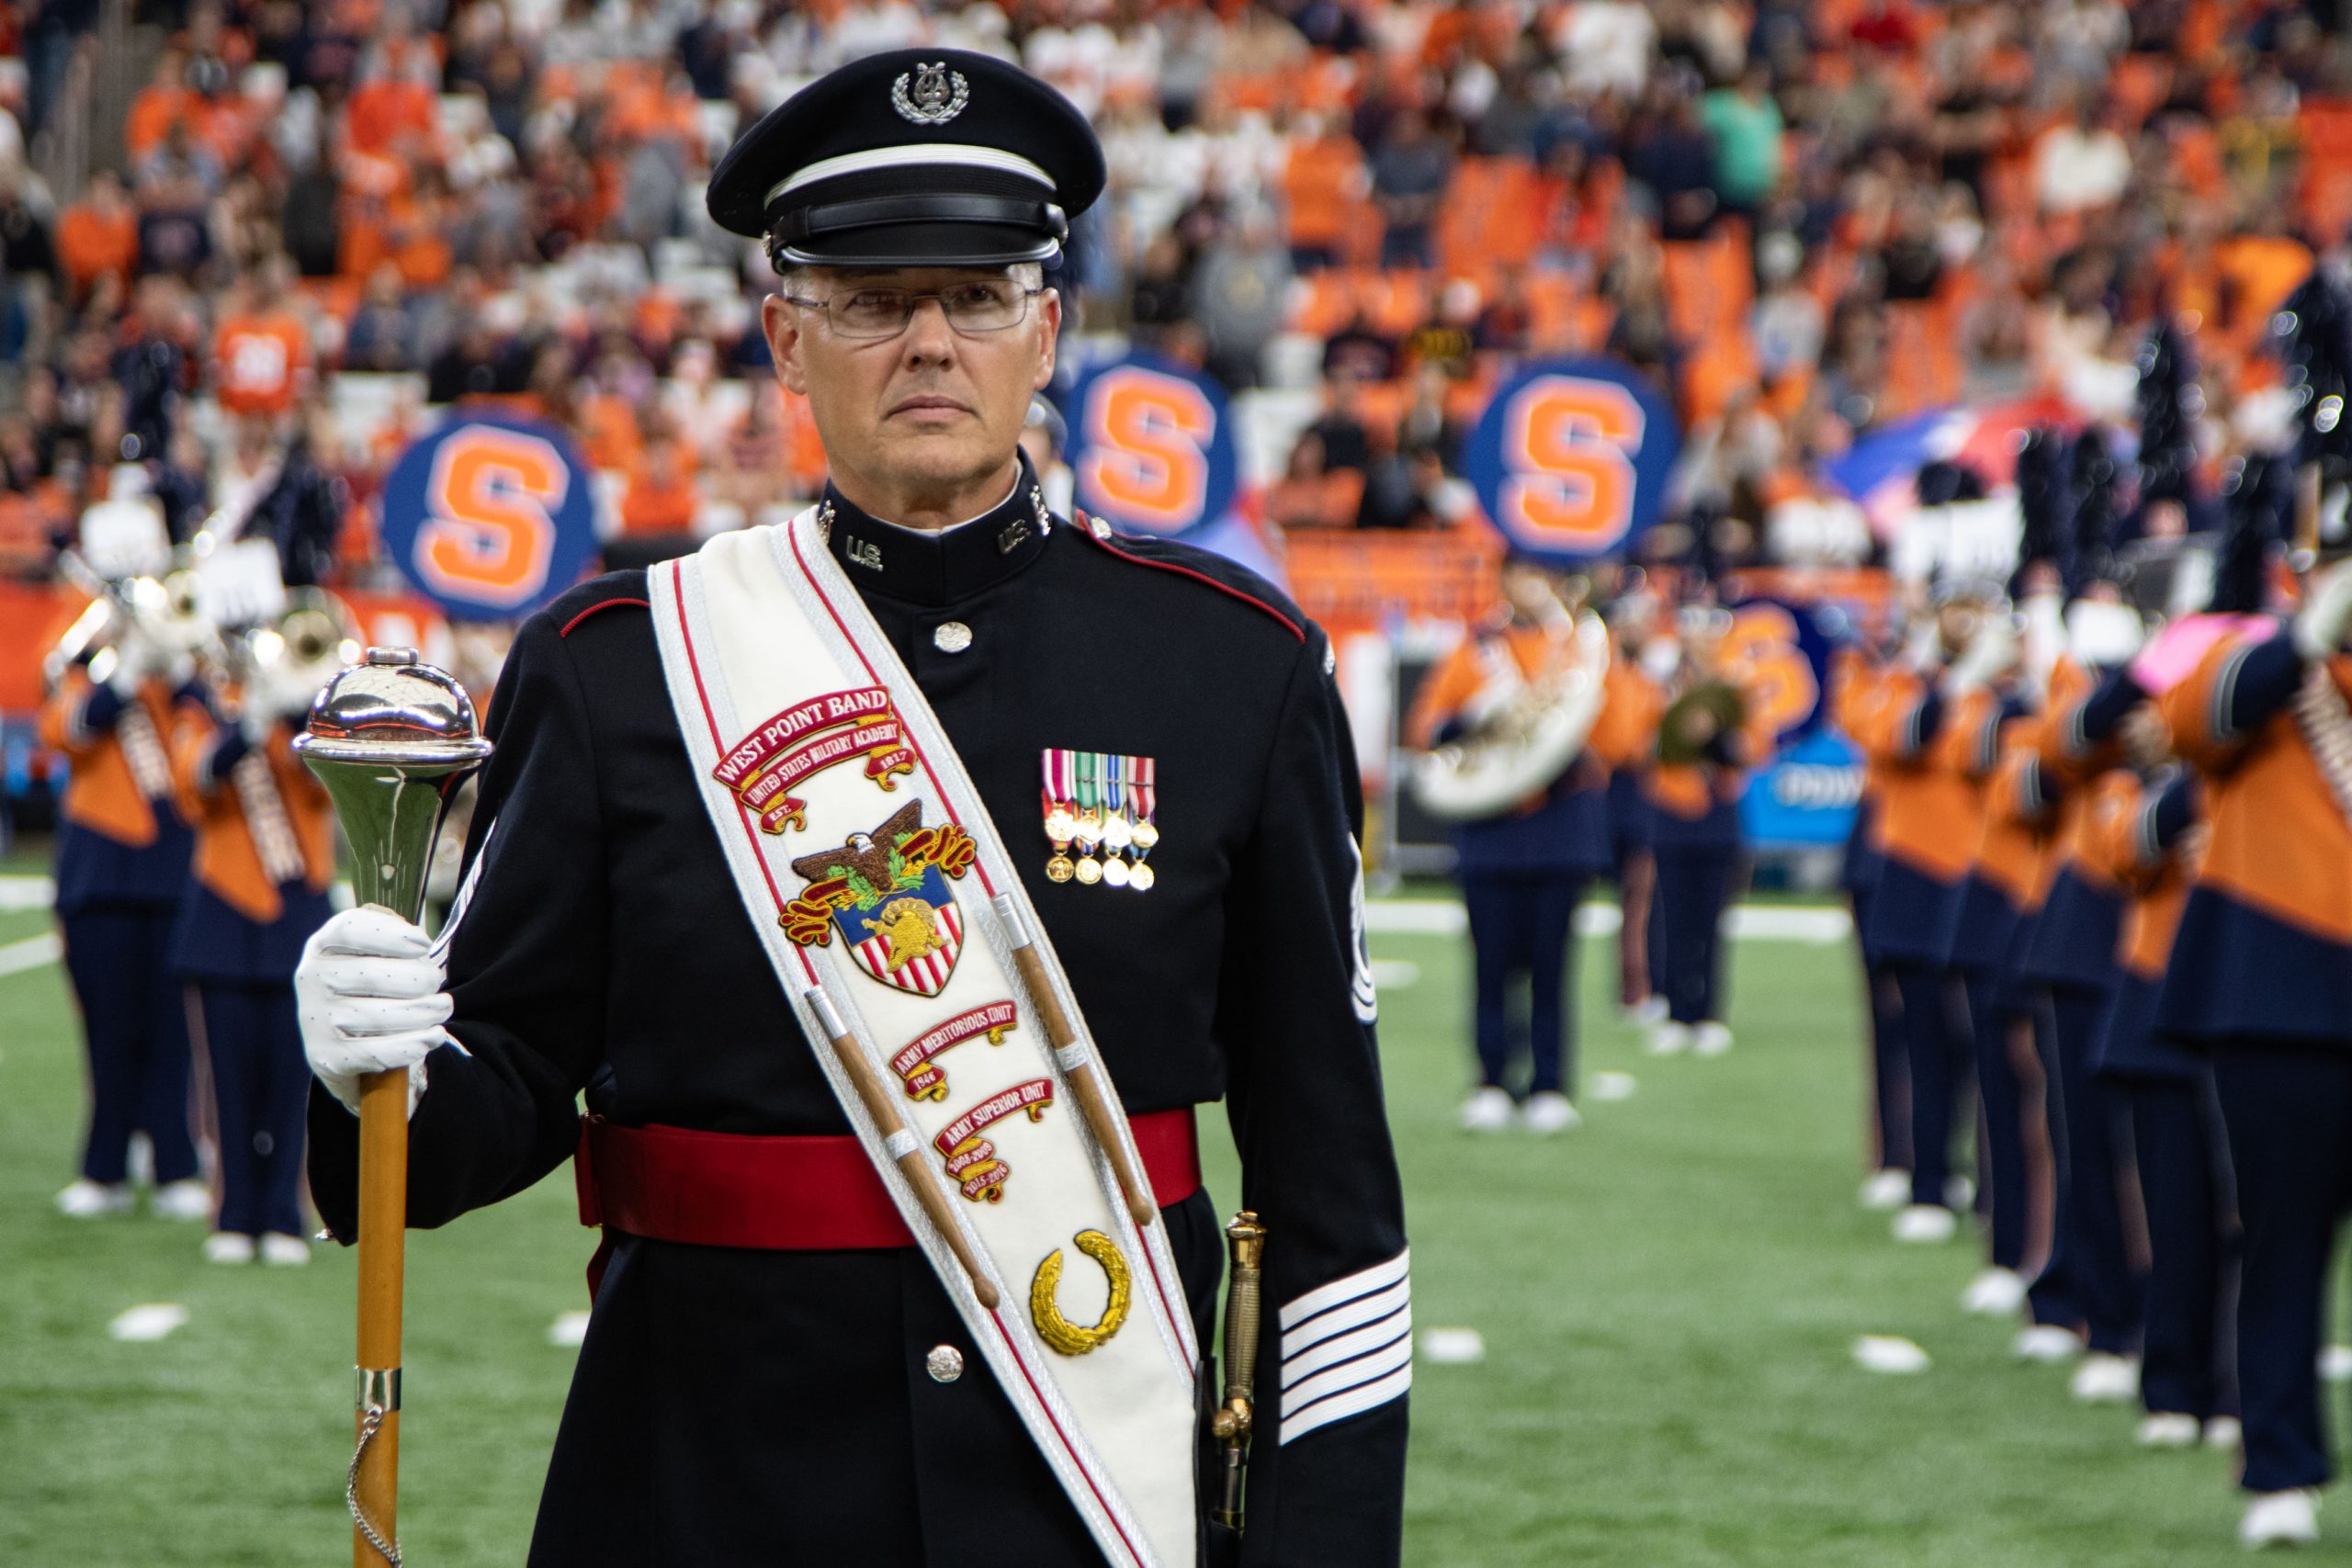 Individual standing in full military uniform on the field in the Dome with the University's marching band in the background. 